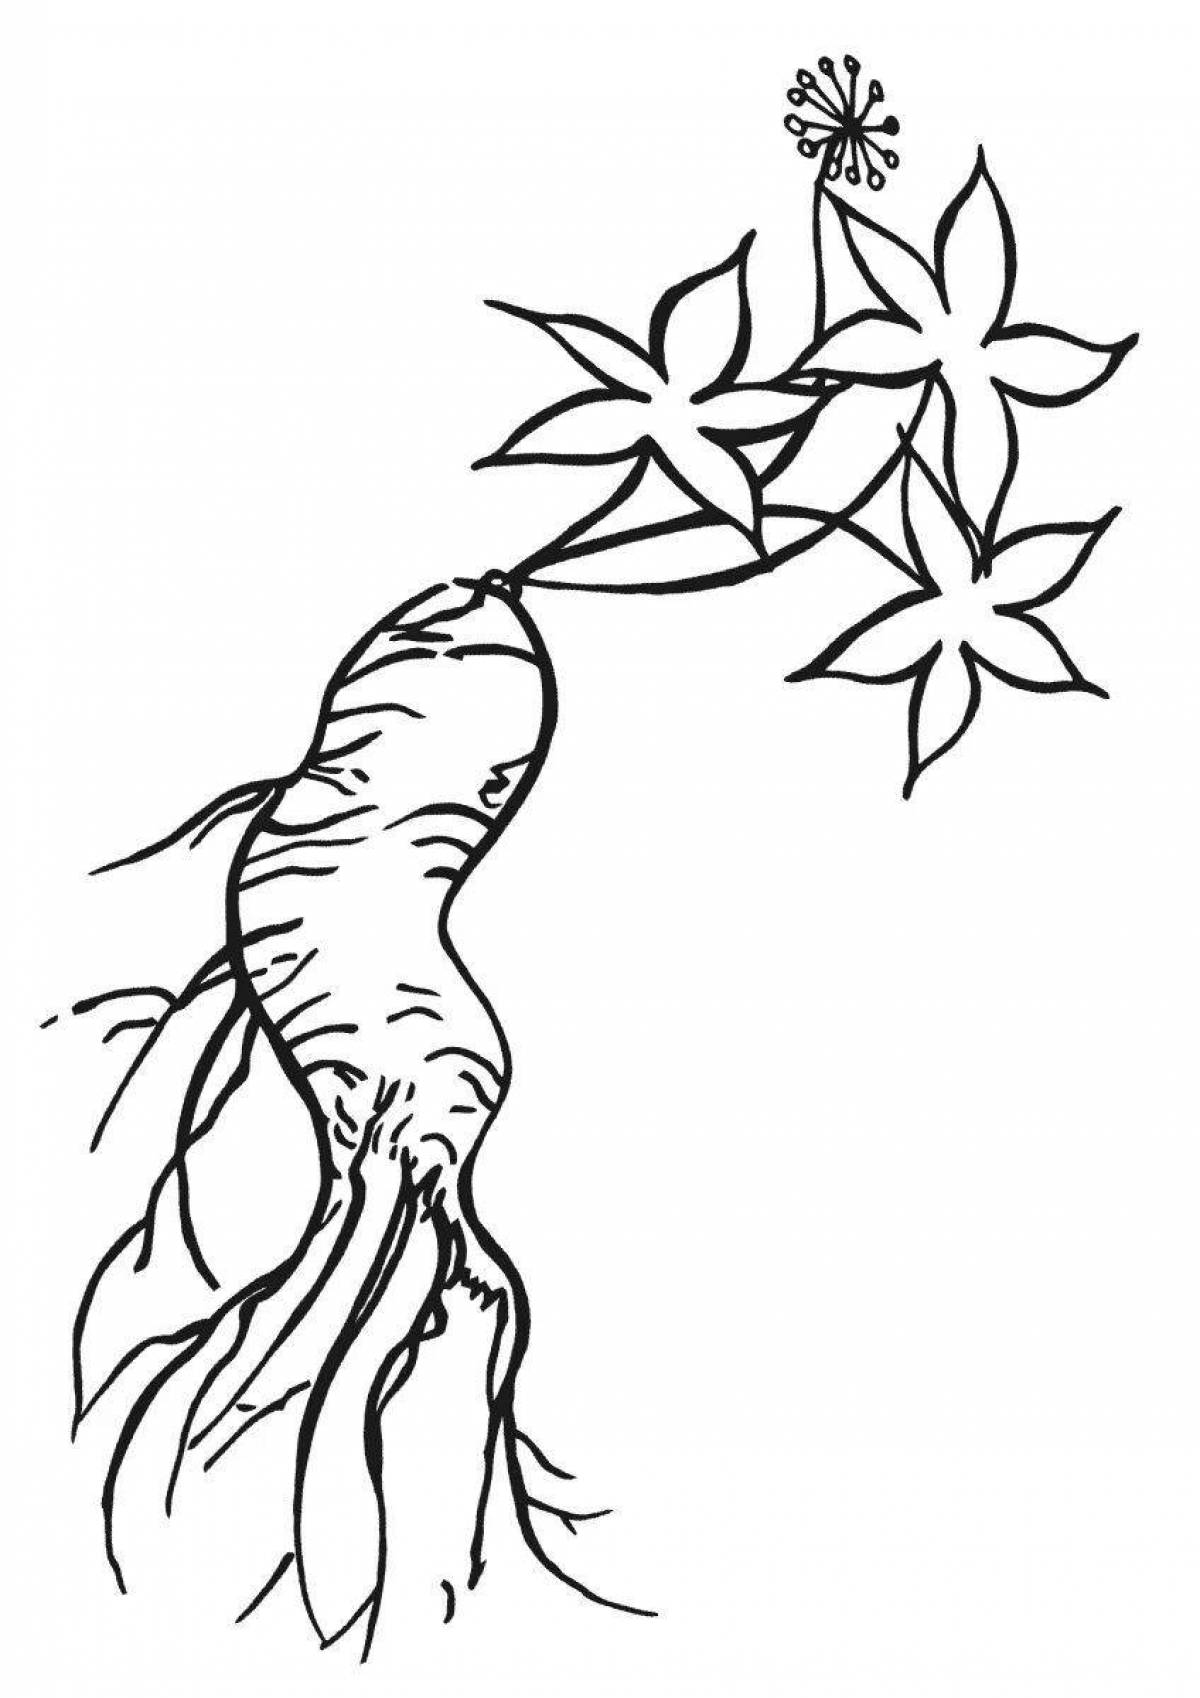 Attractive ginseng coloring page